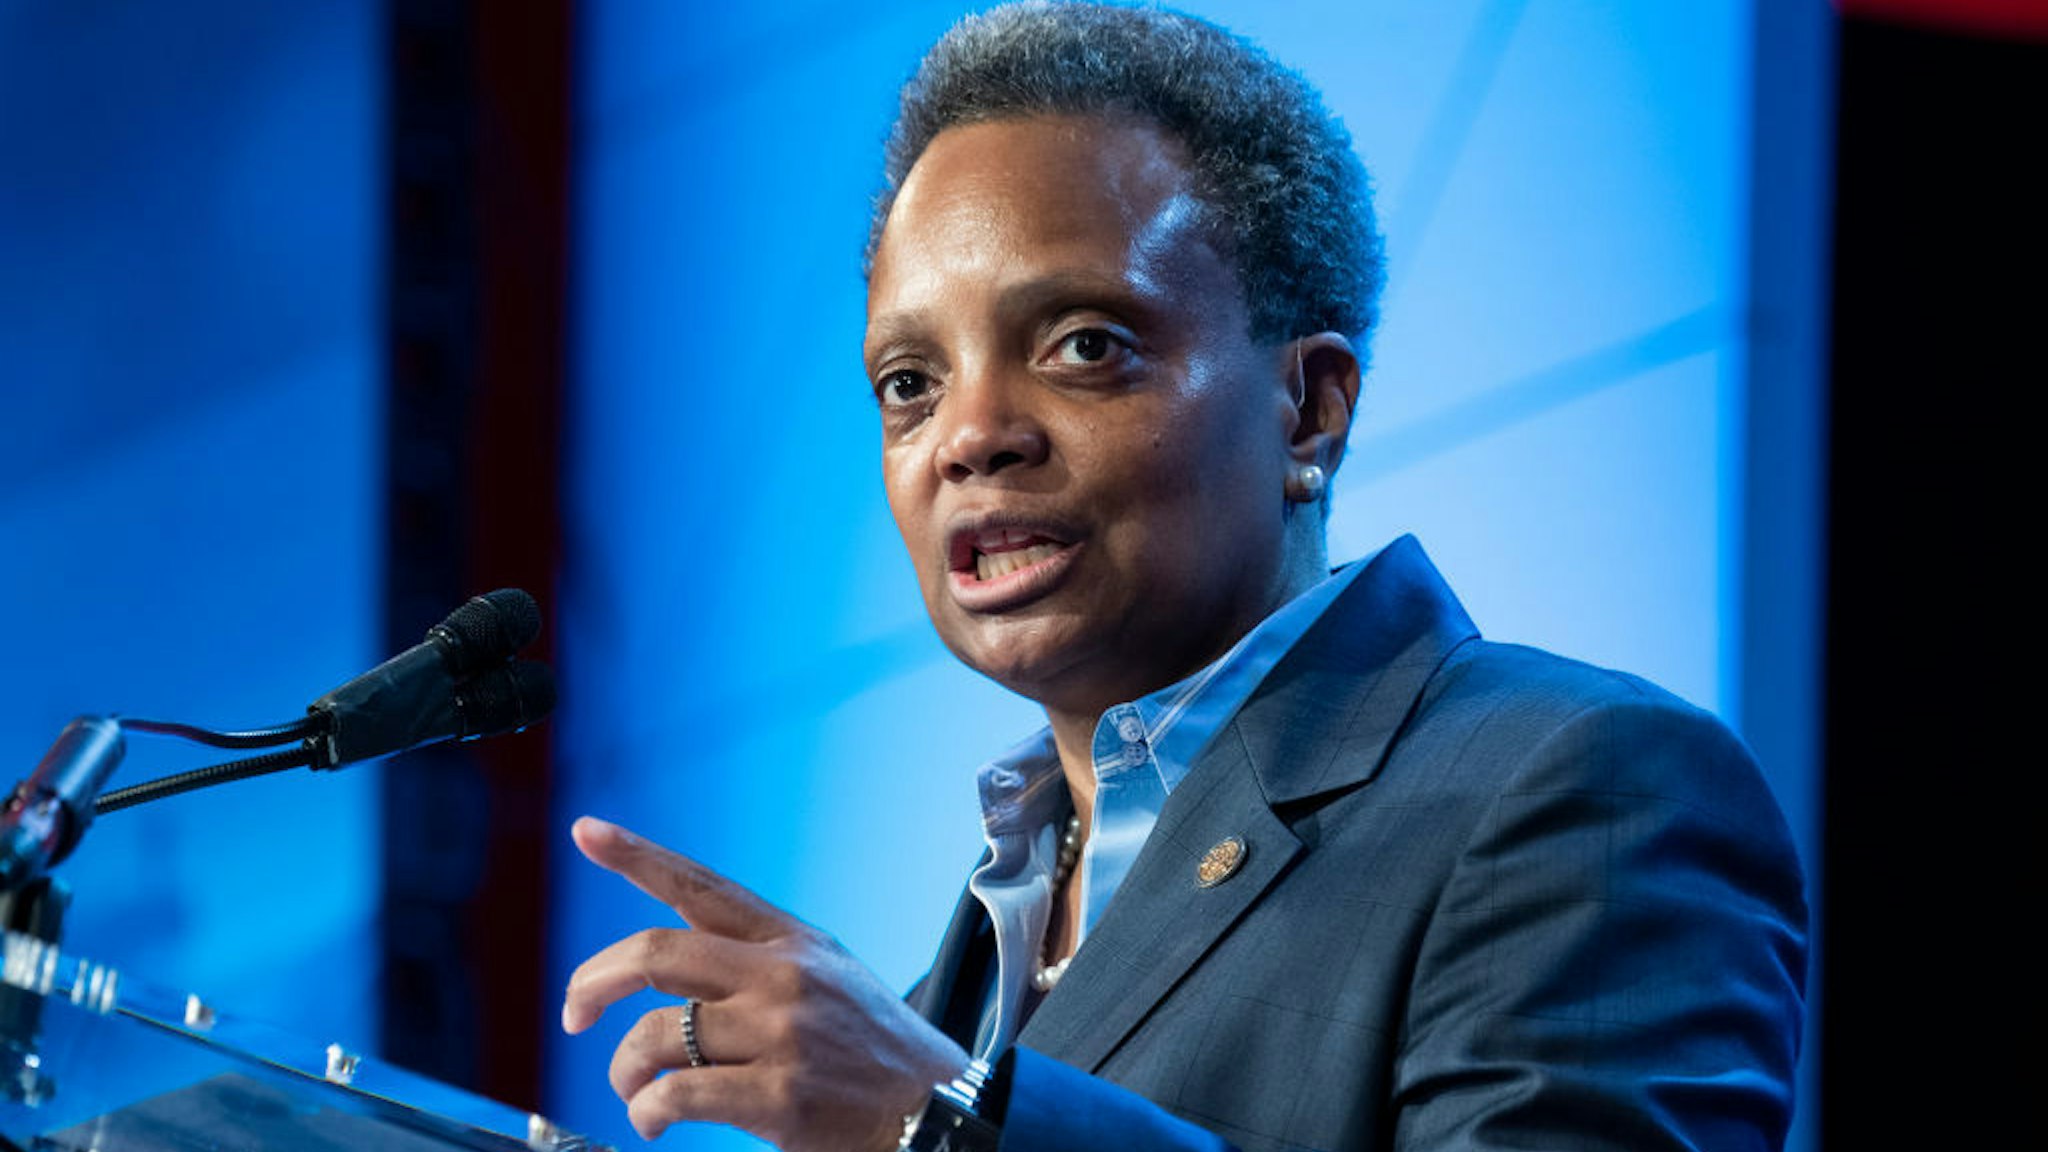 Chicago Mayor Lori Lightfoot, speaks during the U.S Conference of Mayors’ 88th Winter Meeting at the Capital Hilton in Washington, D.C., on Thursday, January 23, 2020. (Photo By Tom Williams/CQ Roll Call)